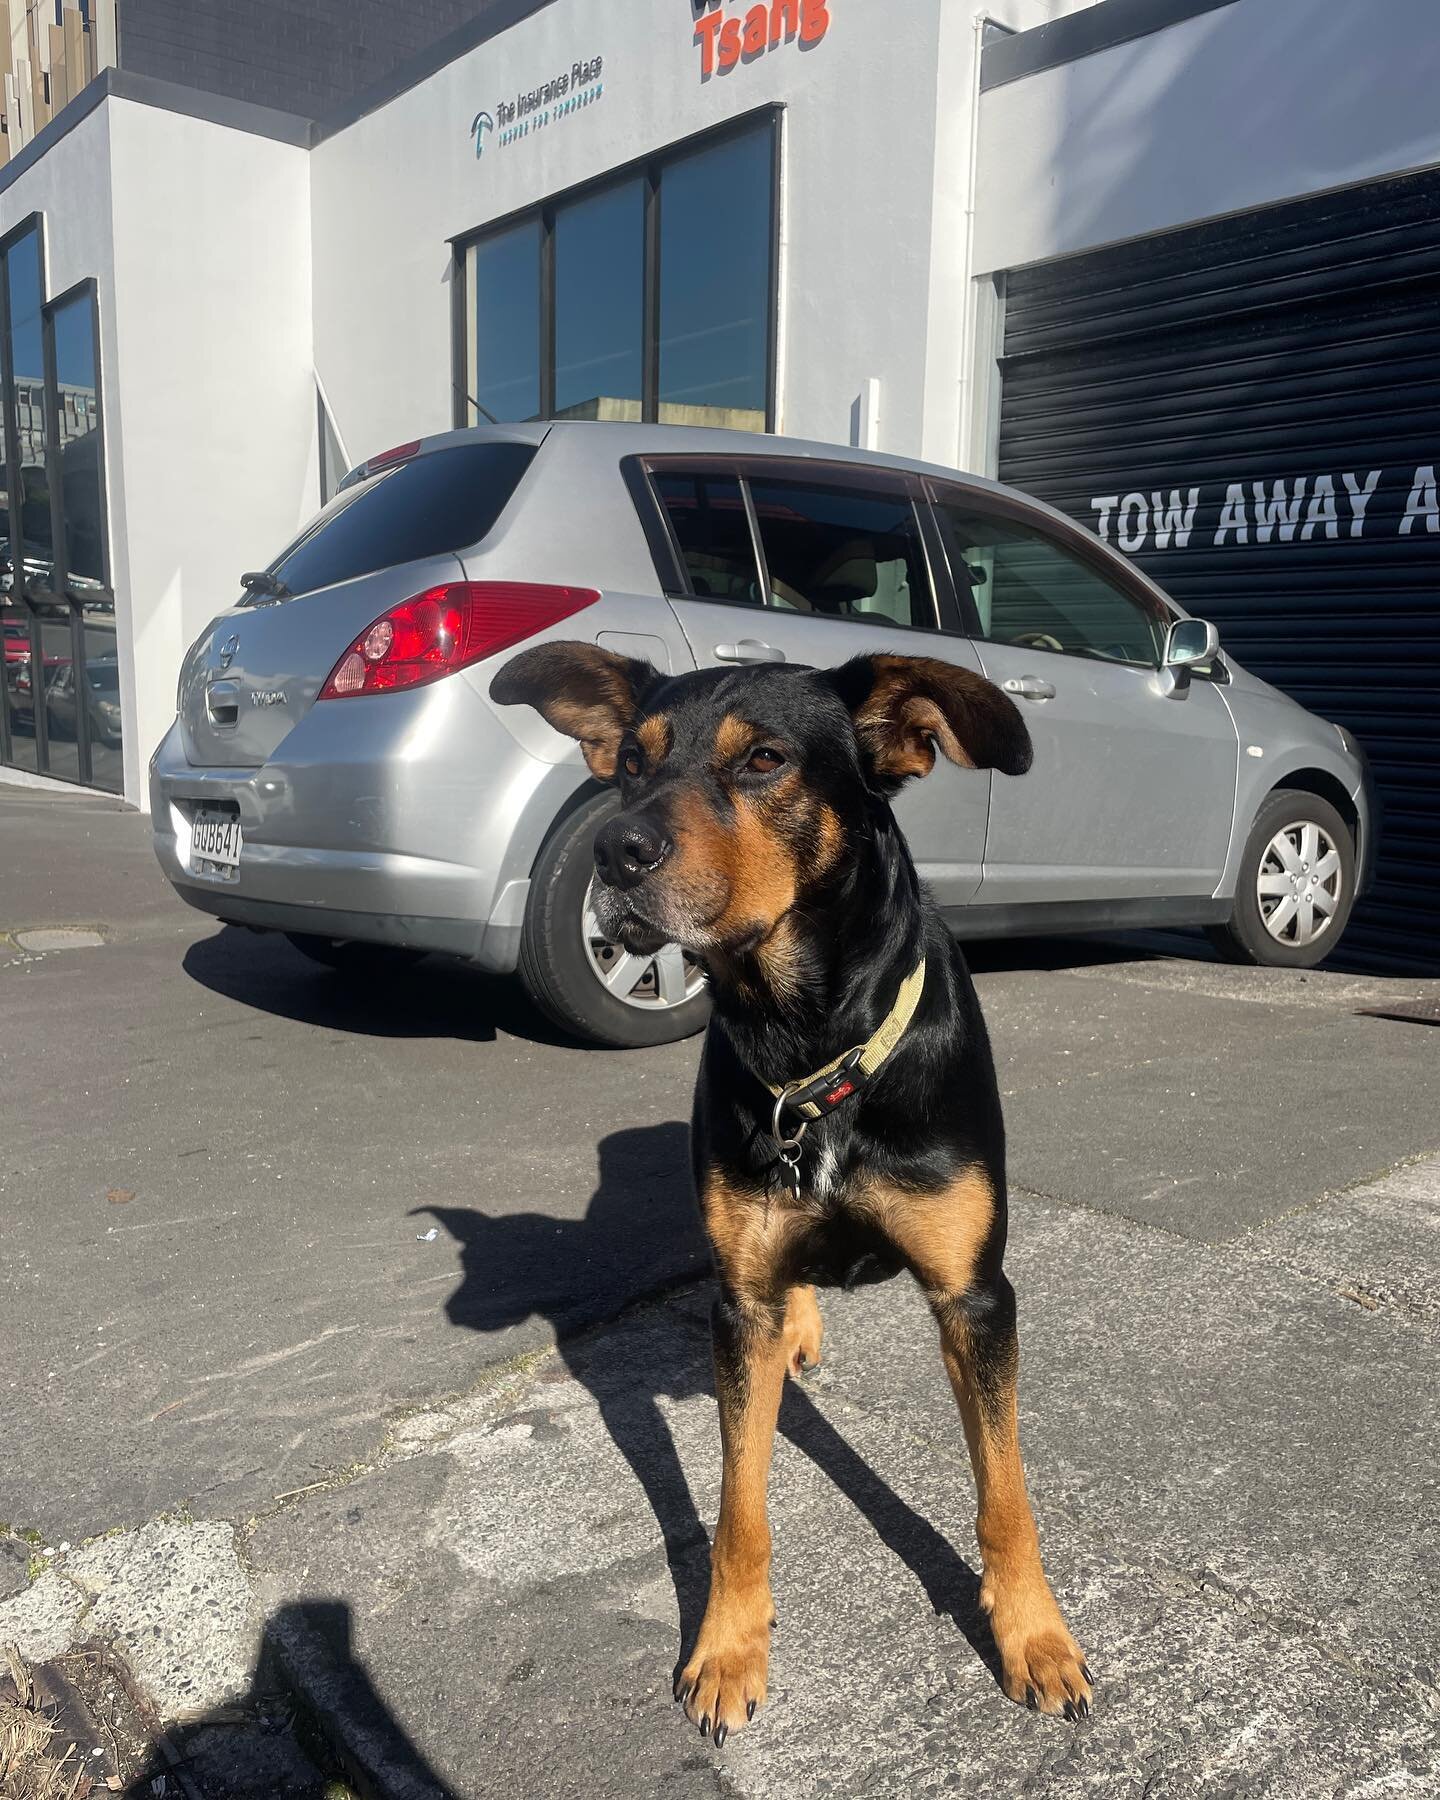 Chase doesn&rsquo;t care about cars just pats #dogsofauckland